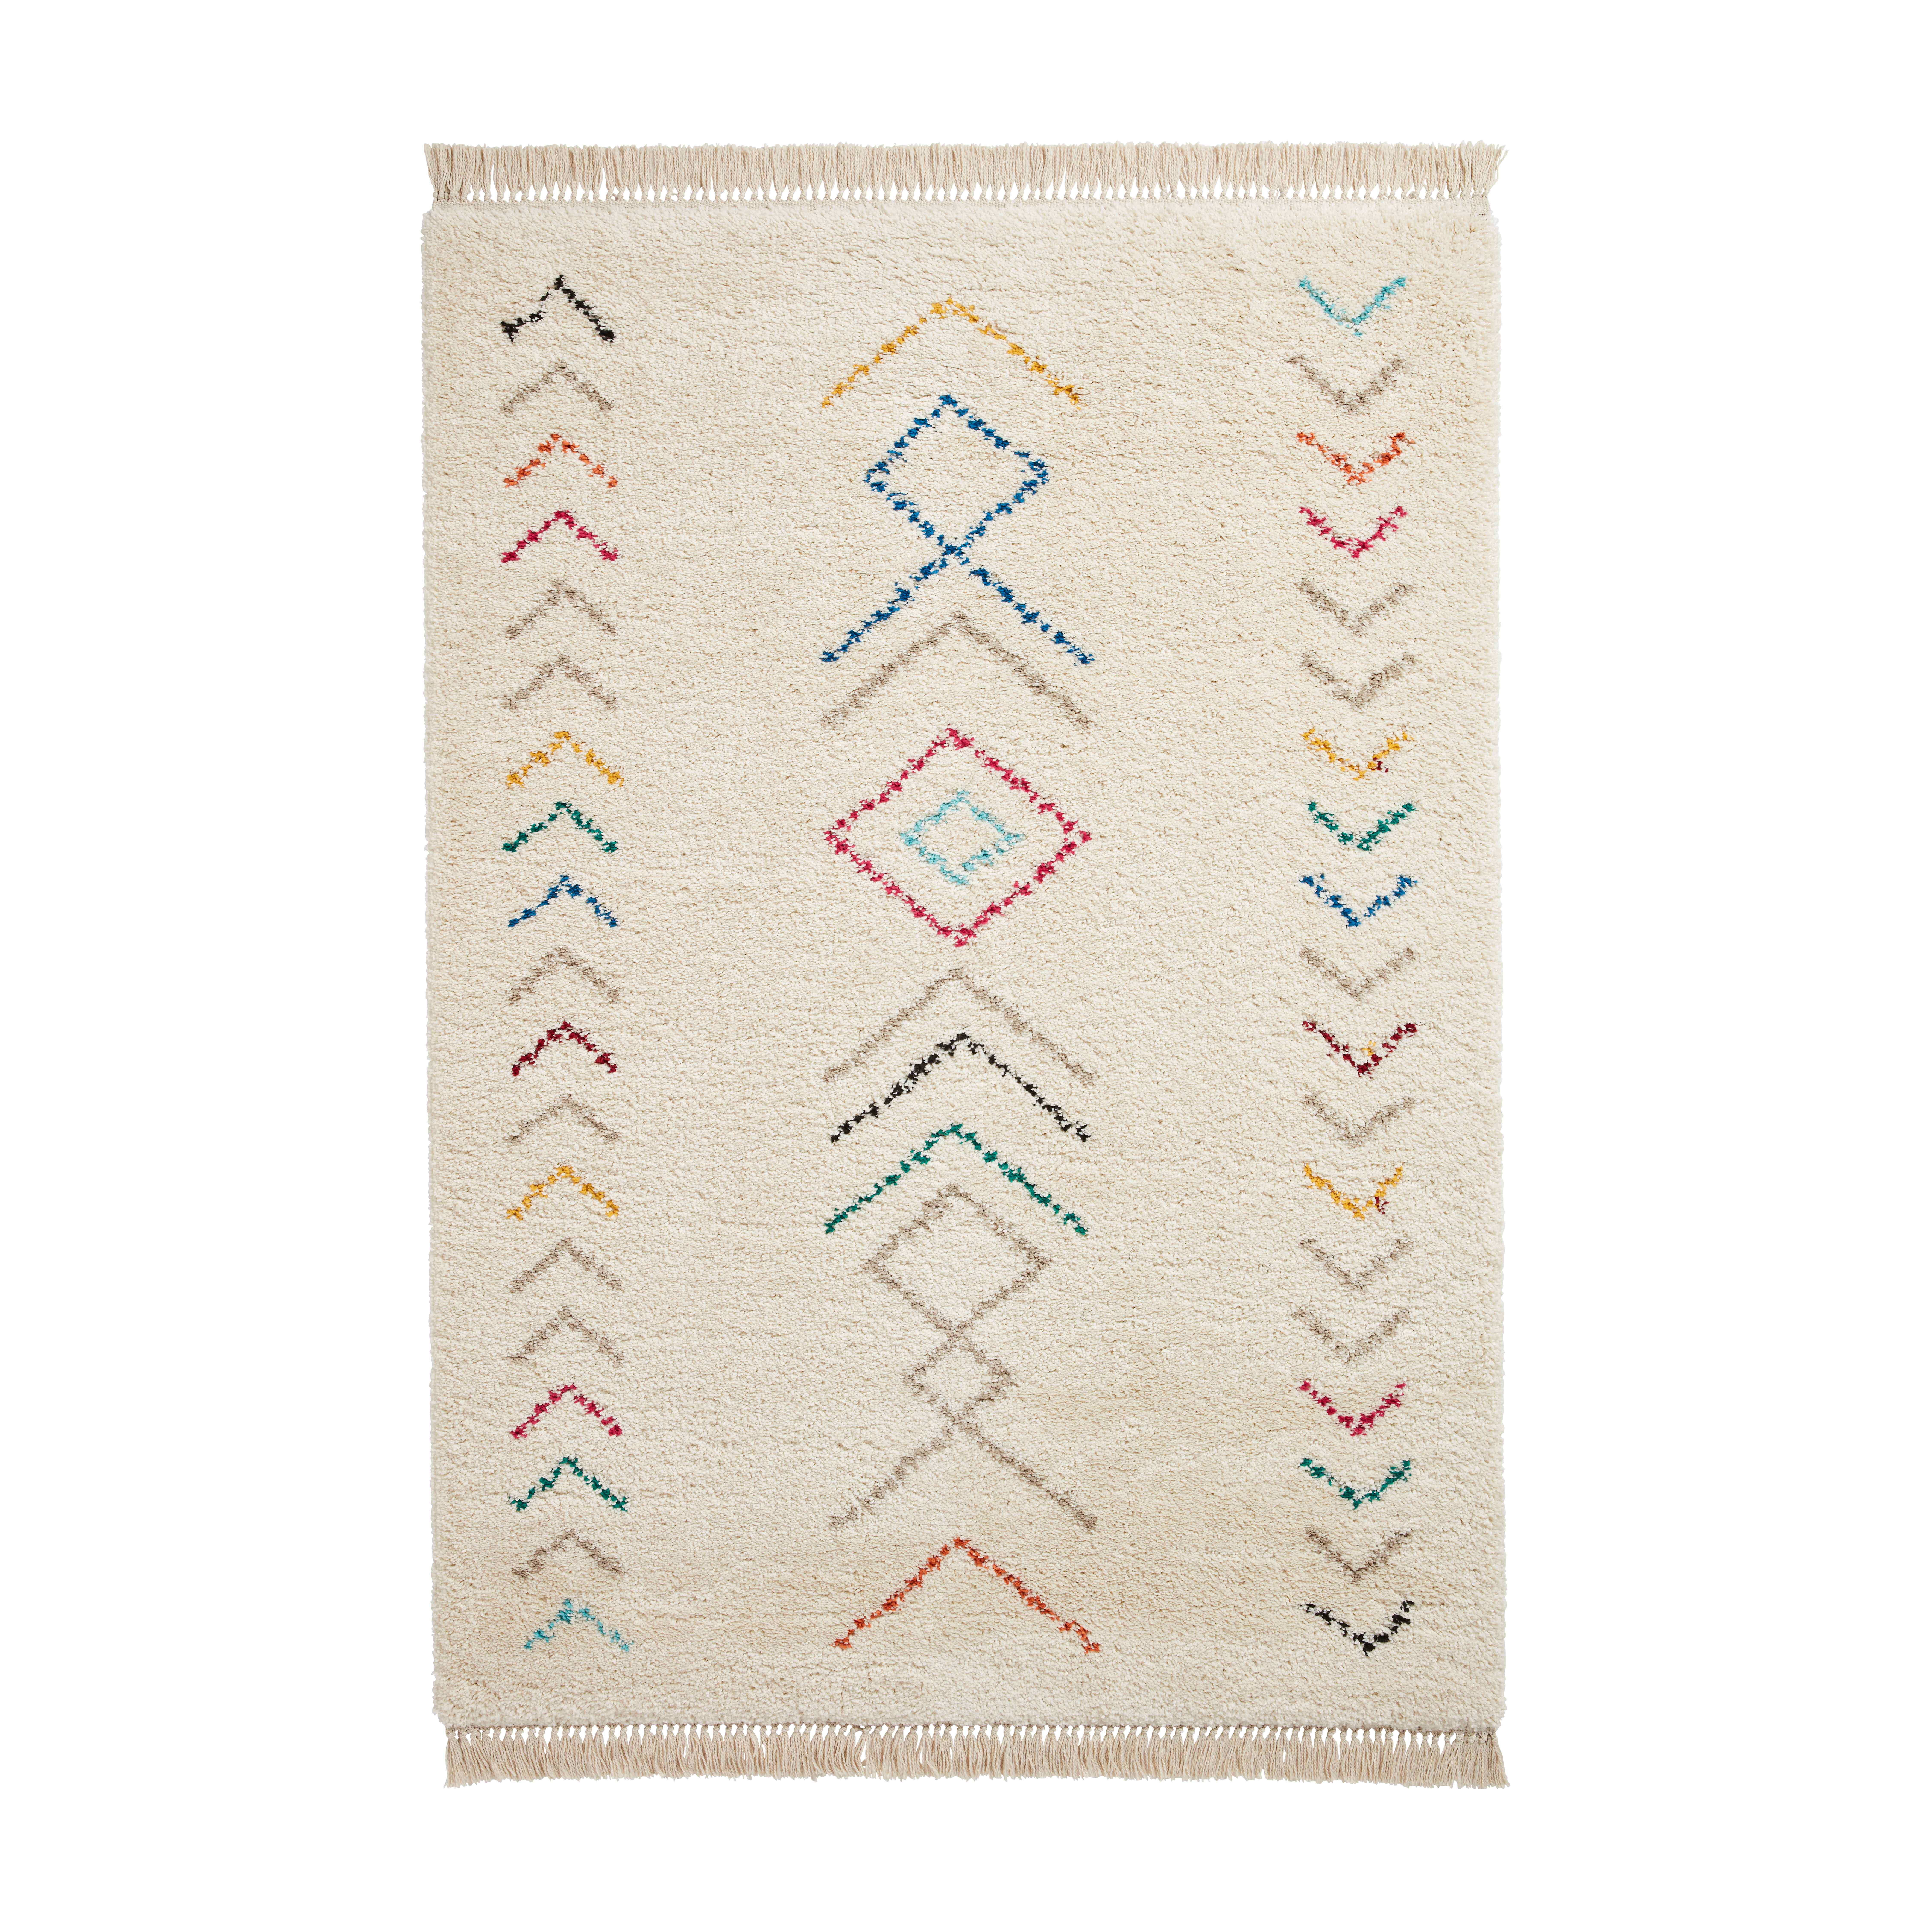 rabat tufted rug a812 3 sizes available